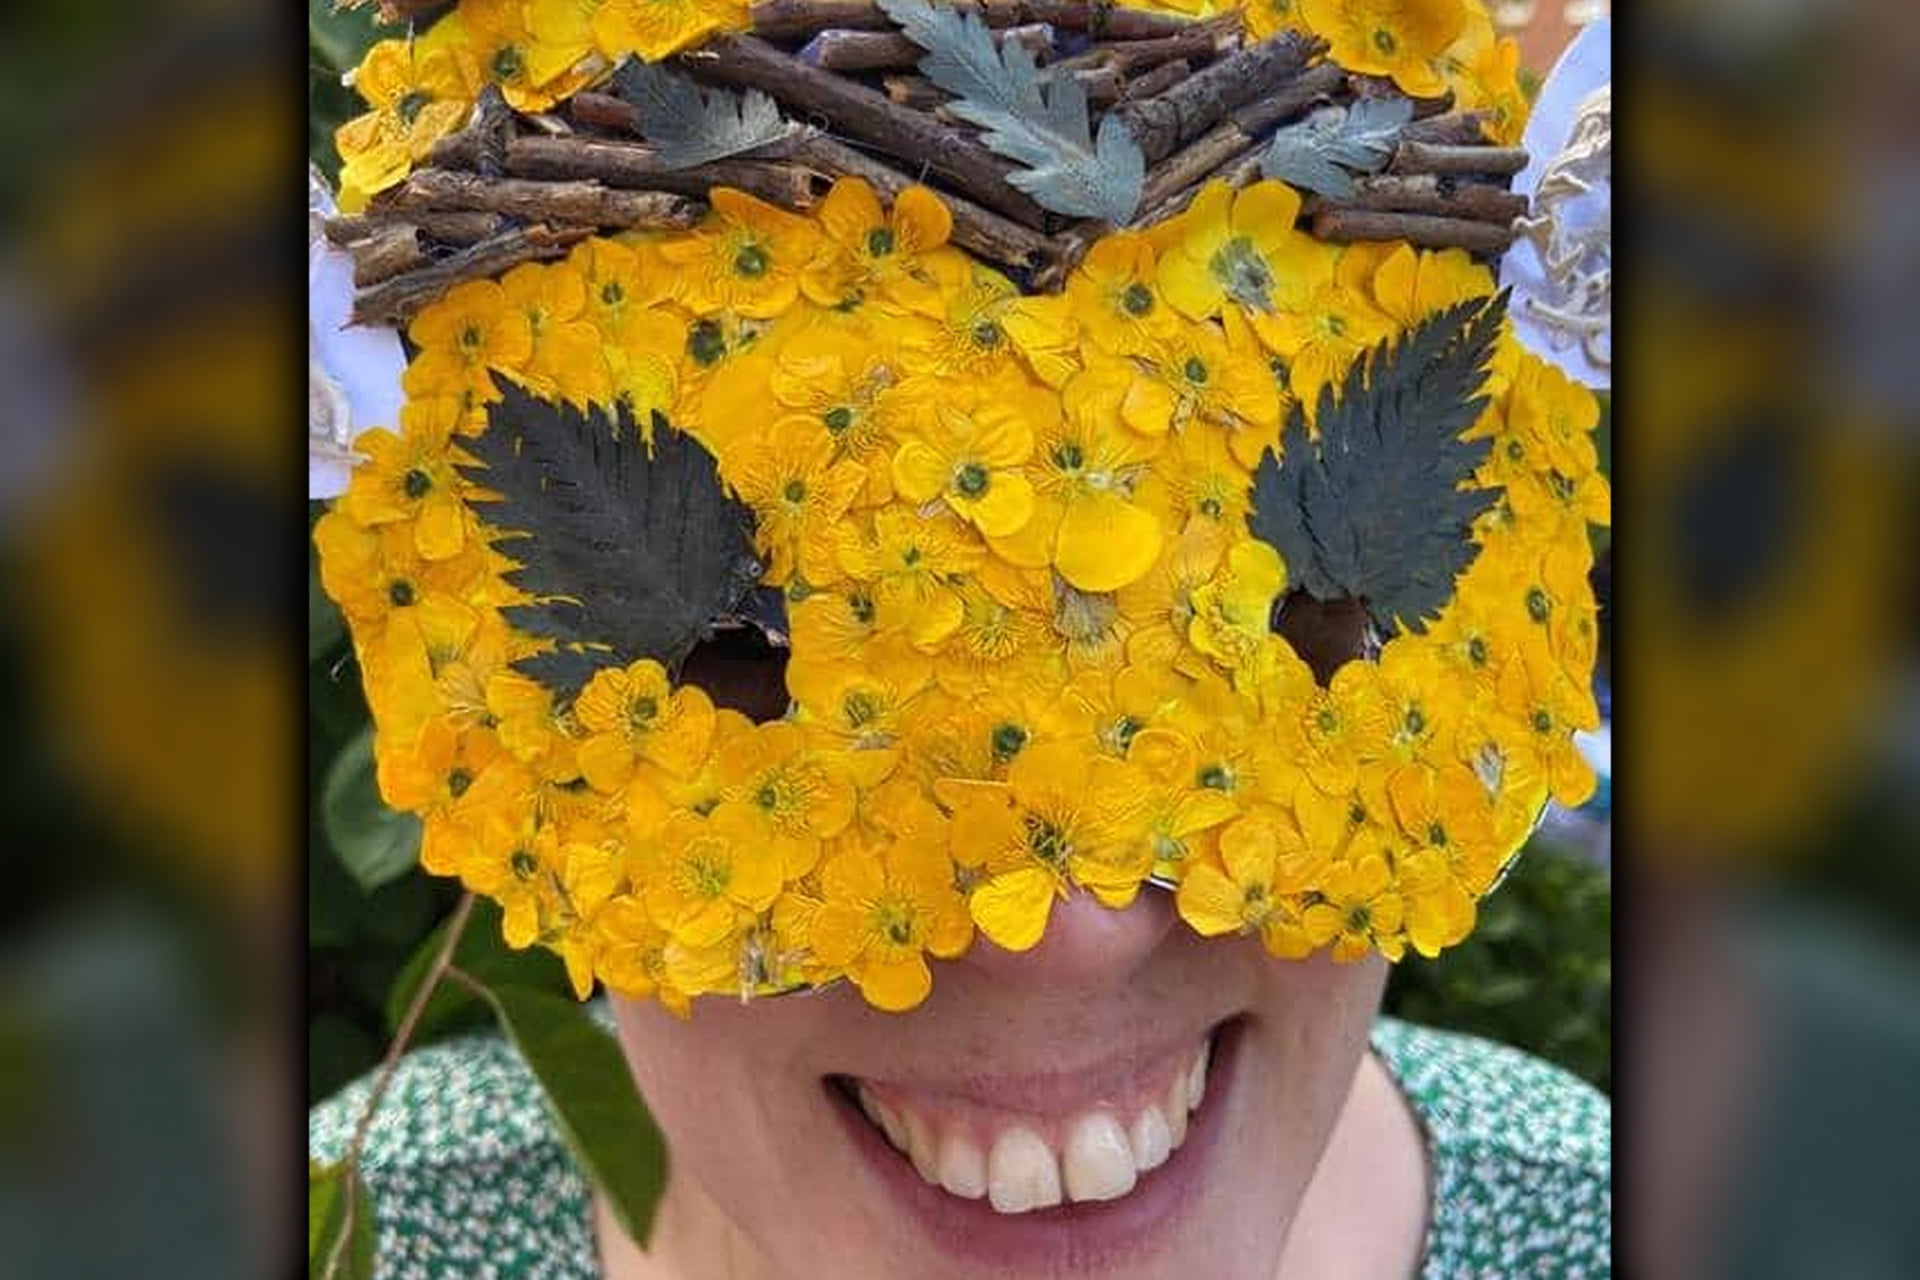 Lady Wearing A Mask to look like a bee